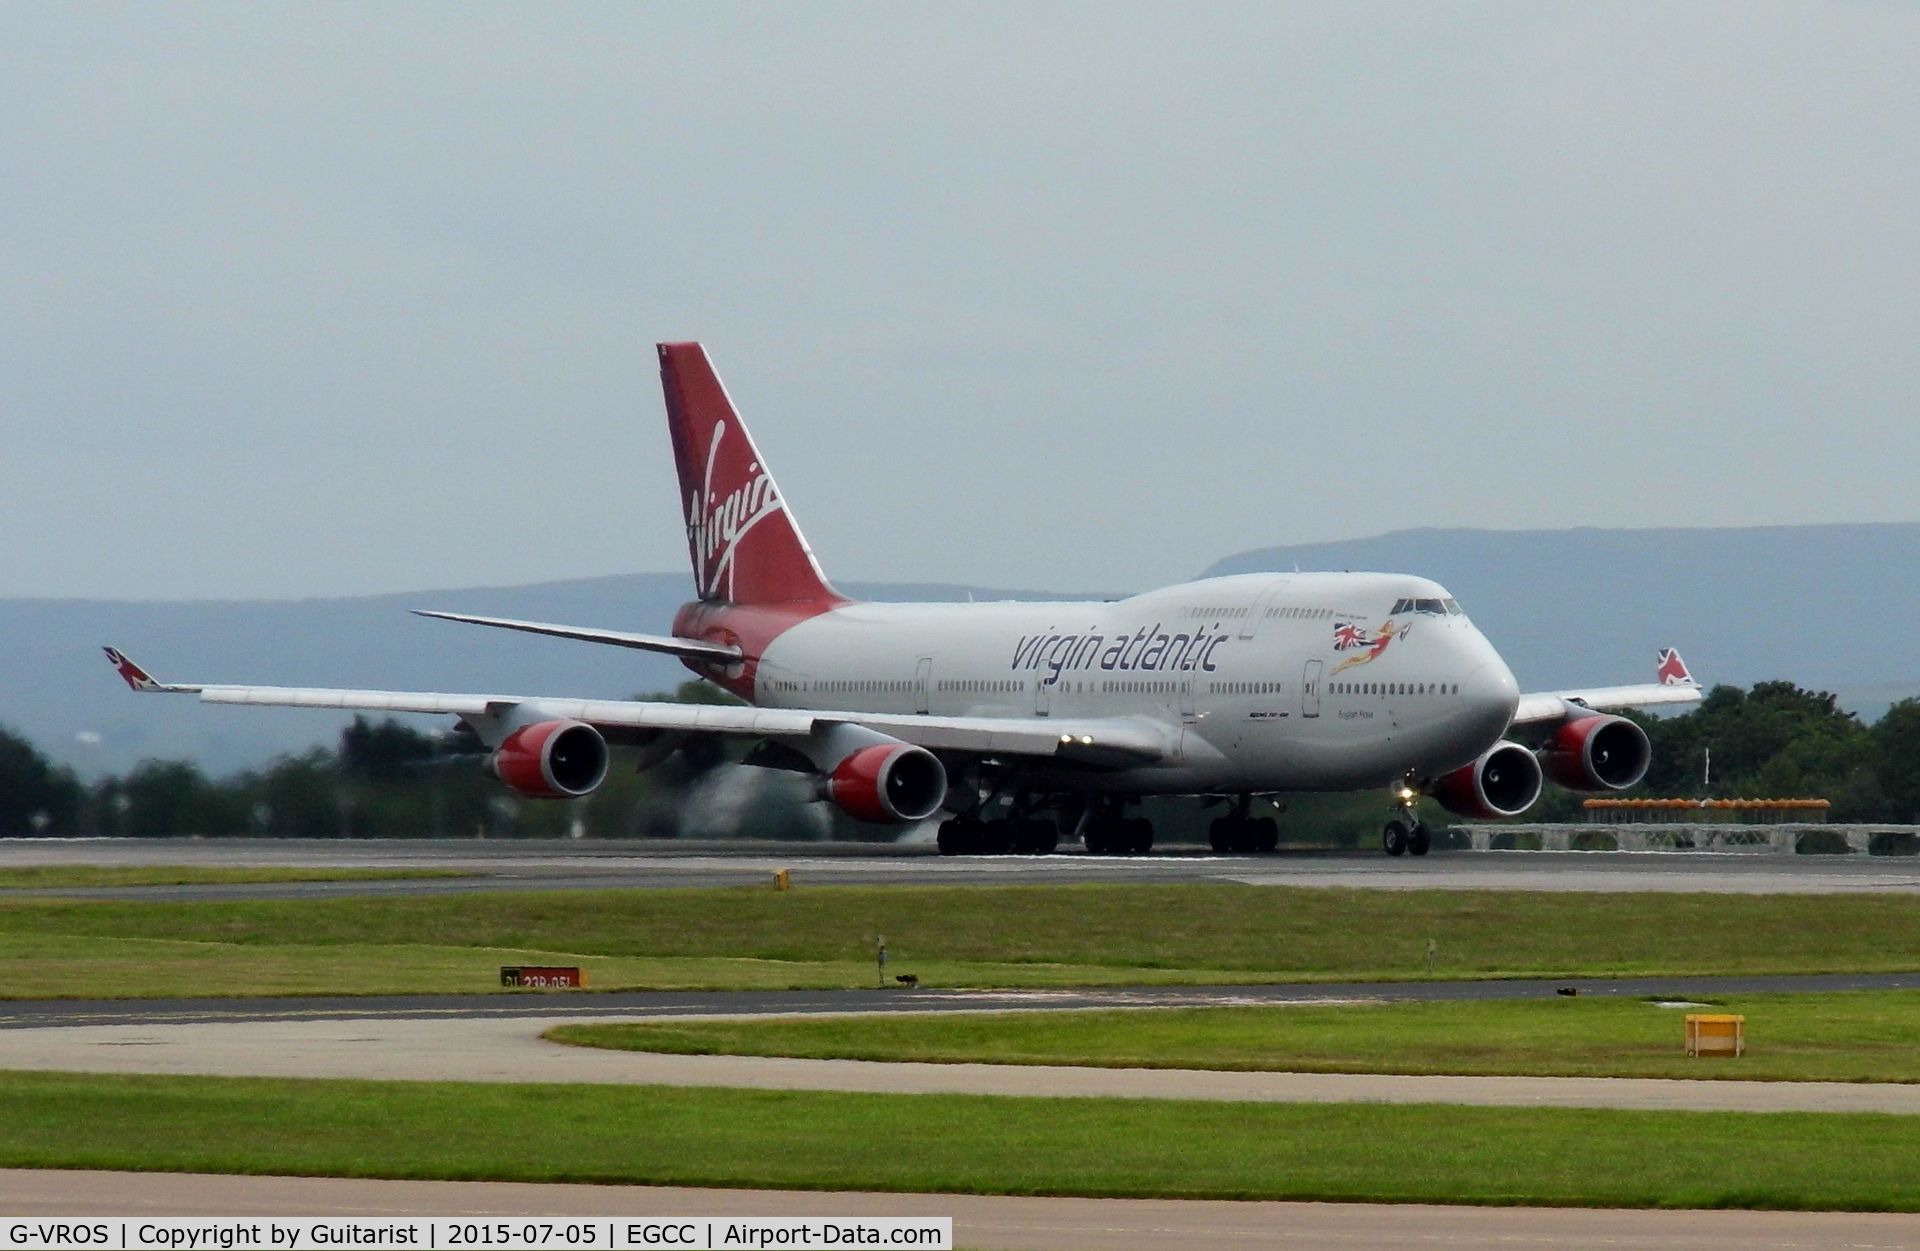 G-VROS, 2001 Boeing 747-443 C/N 30885, At Manchester